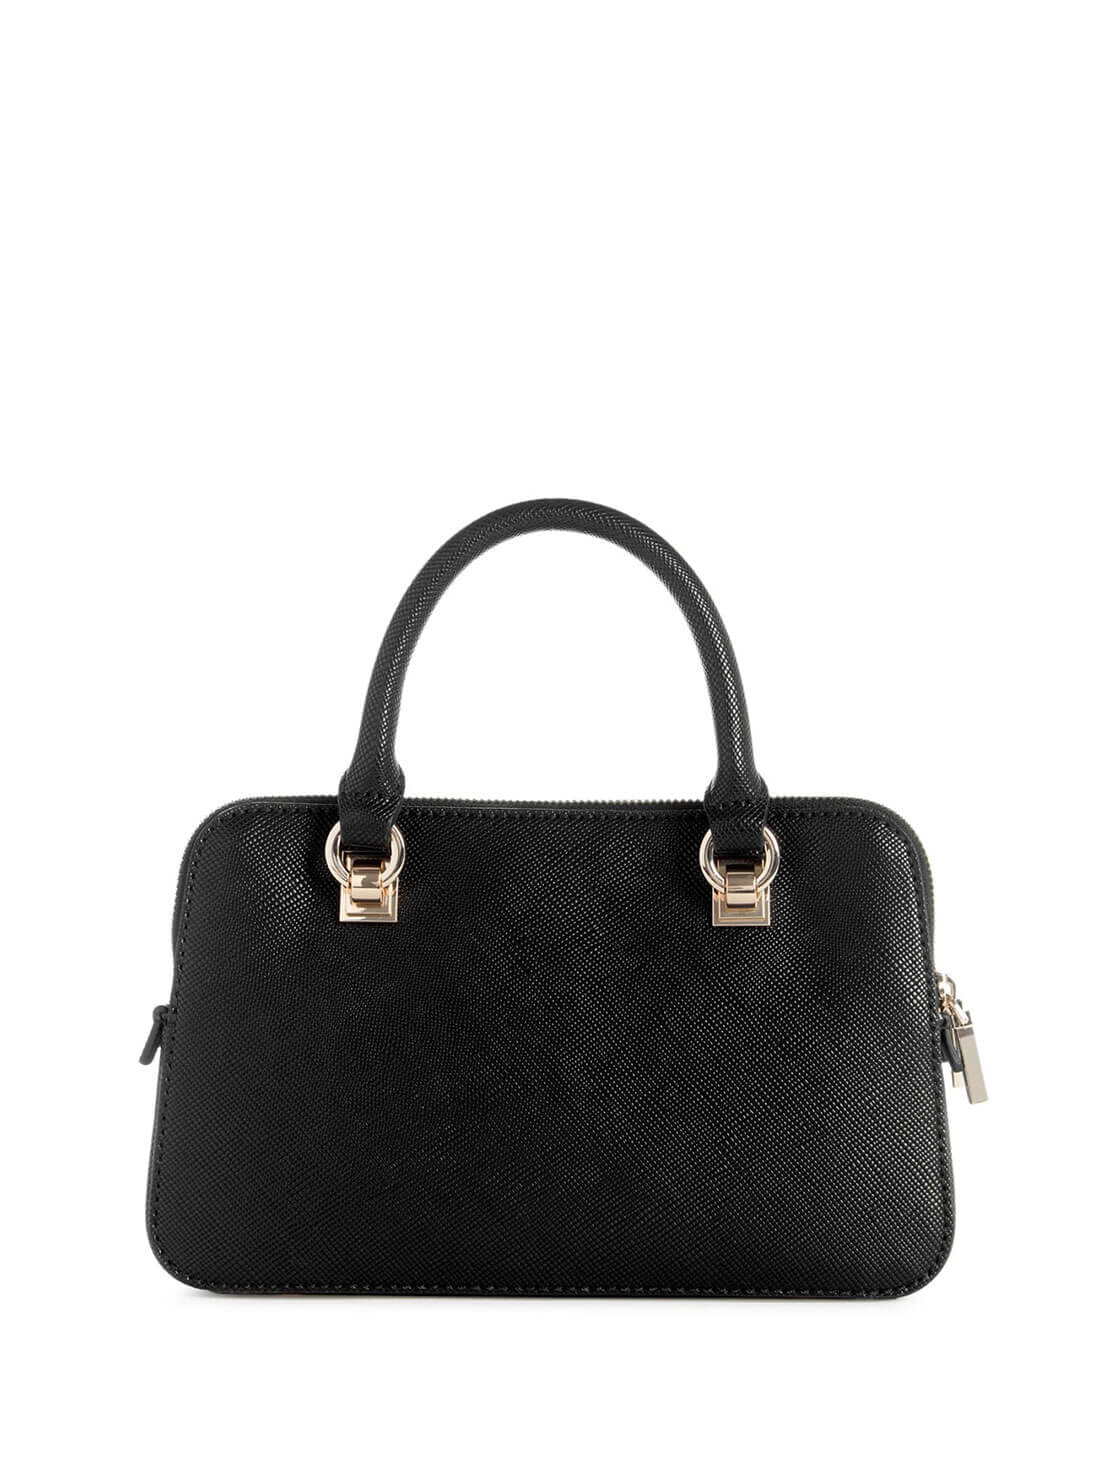 Women's Black Brynlee Small Status Satchel Bag back view